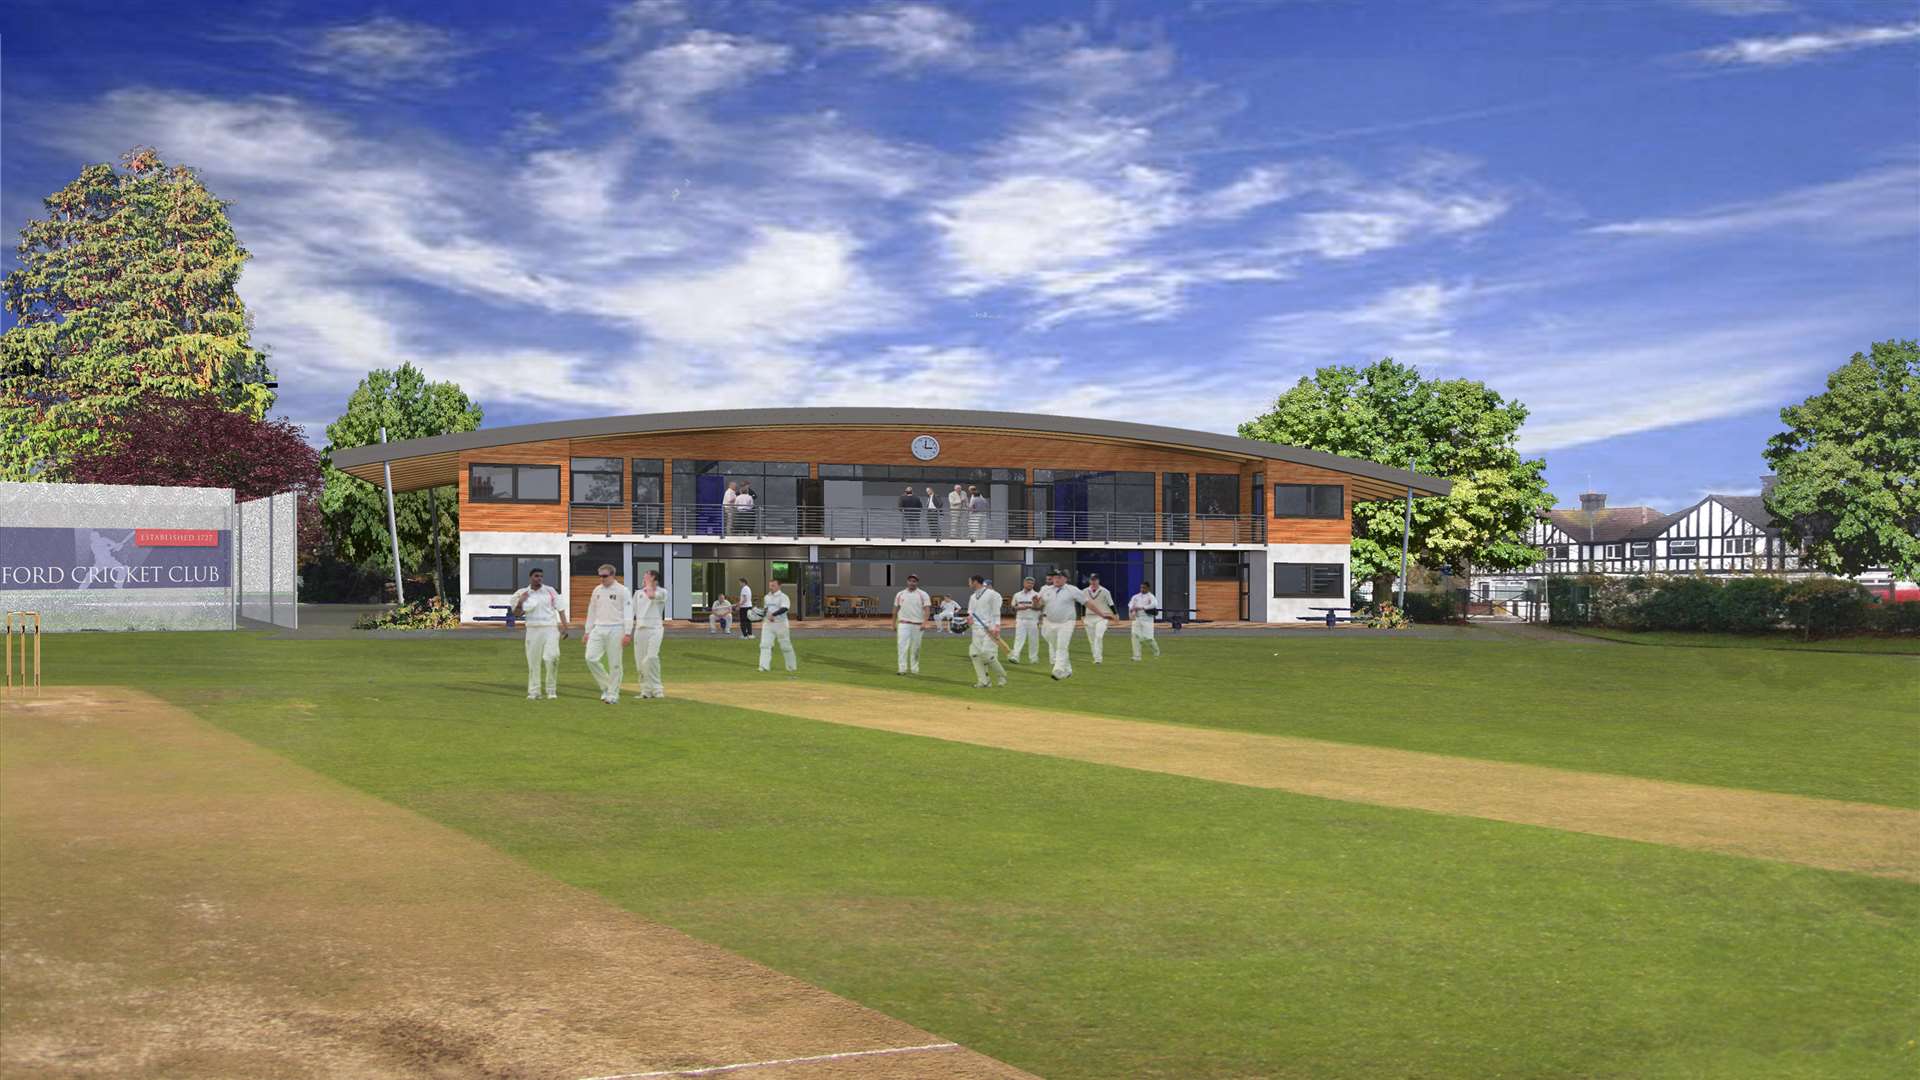 Plans were revealed at the club's AGM